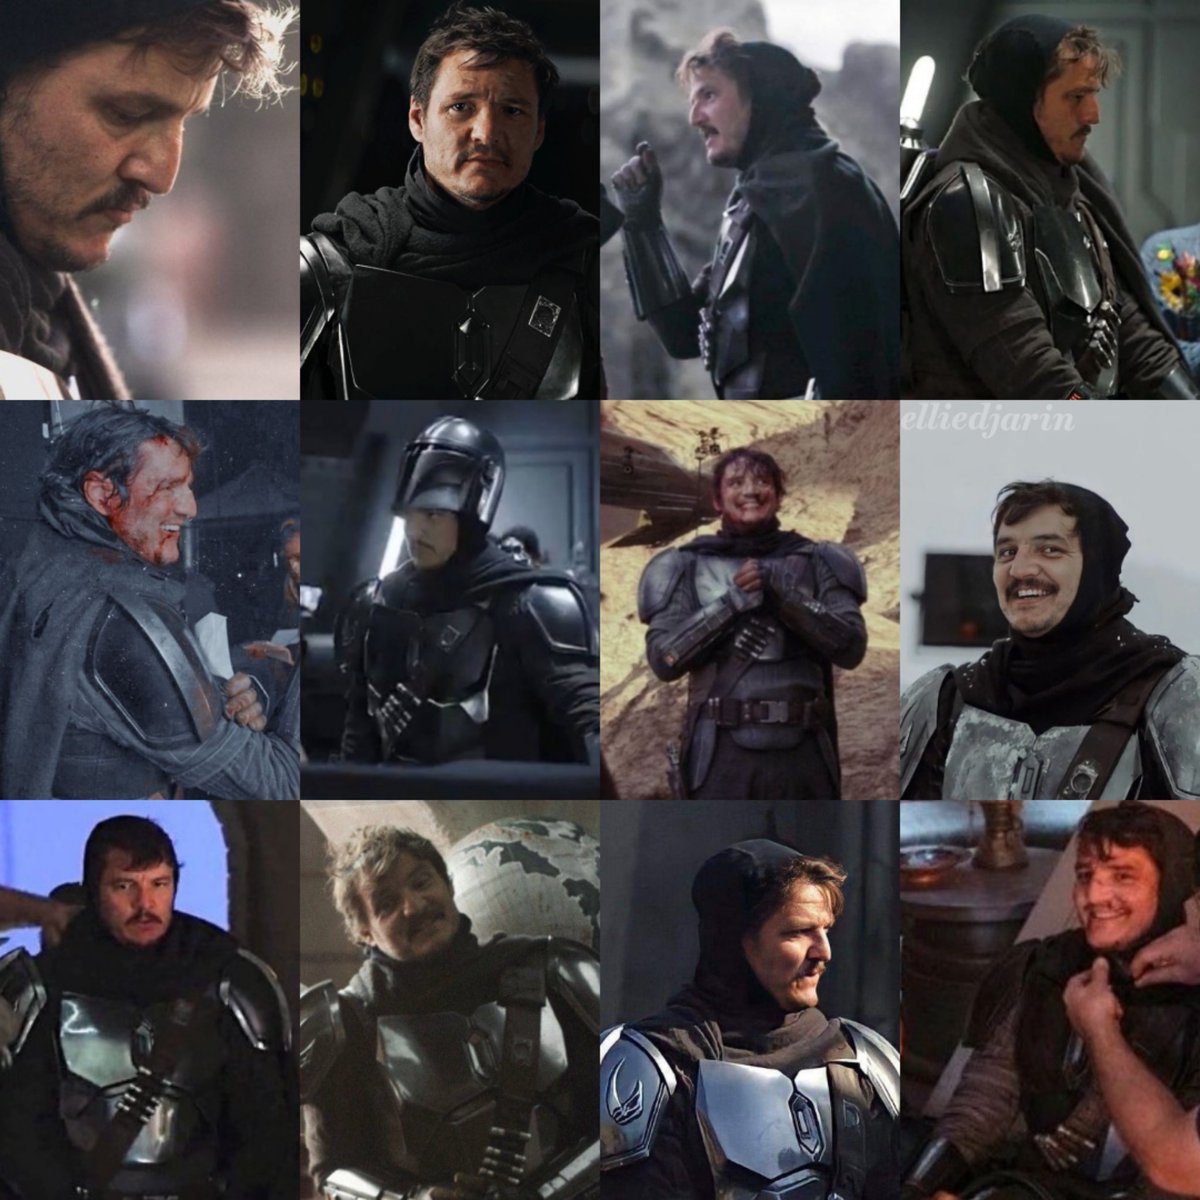 pedro pascal in the suit as din djarin, the mandalorian- you will ALWAYS be famous & i miss you so much 😭😭